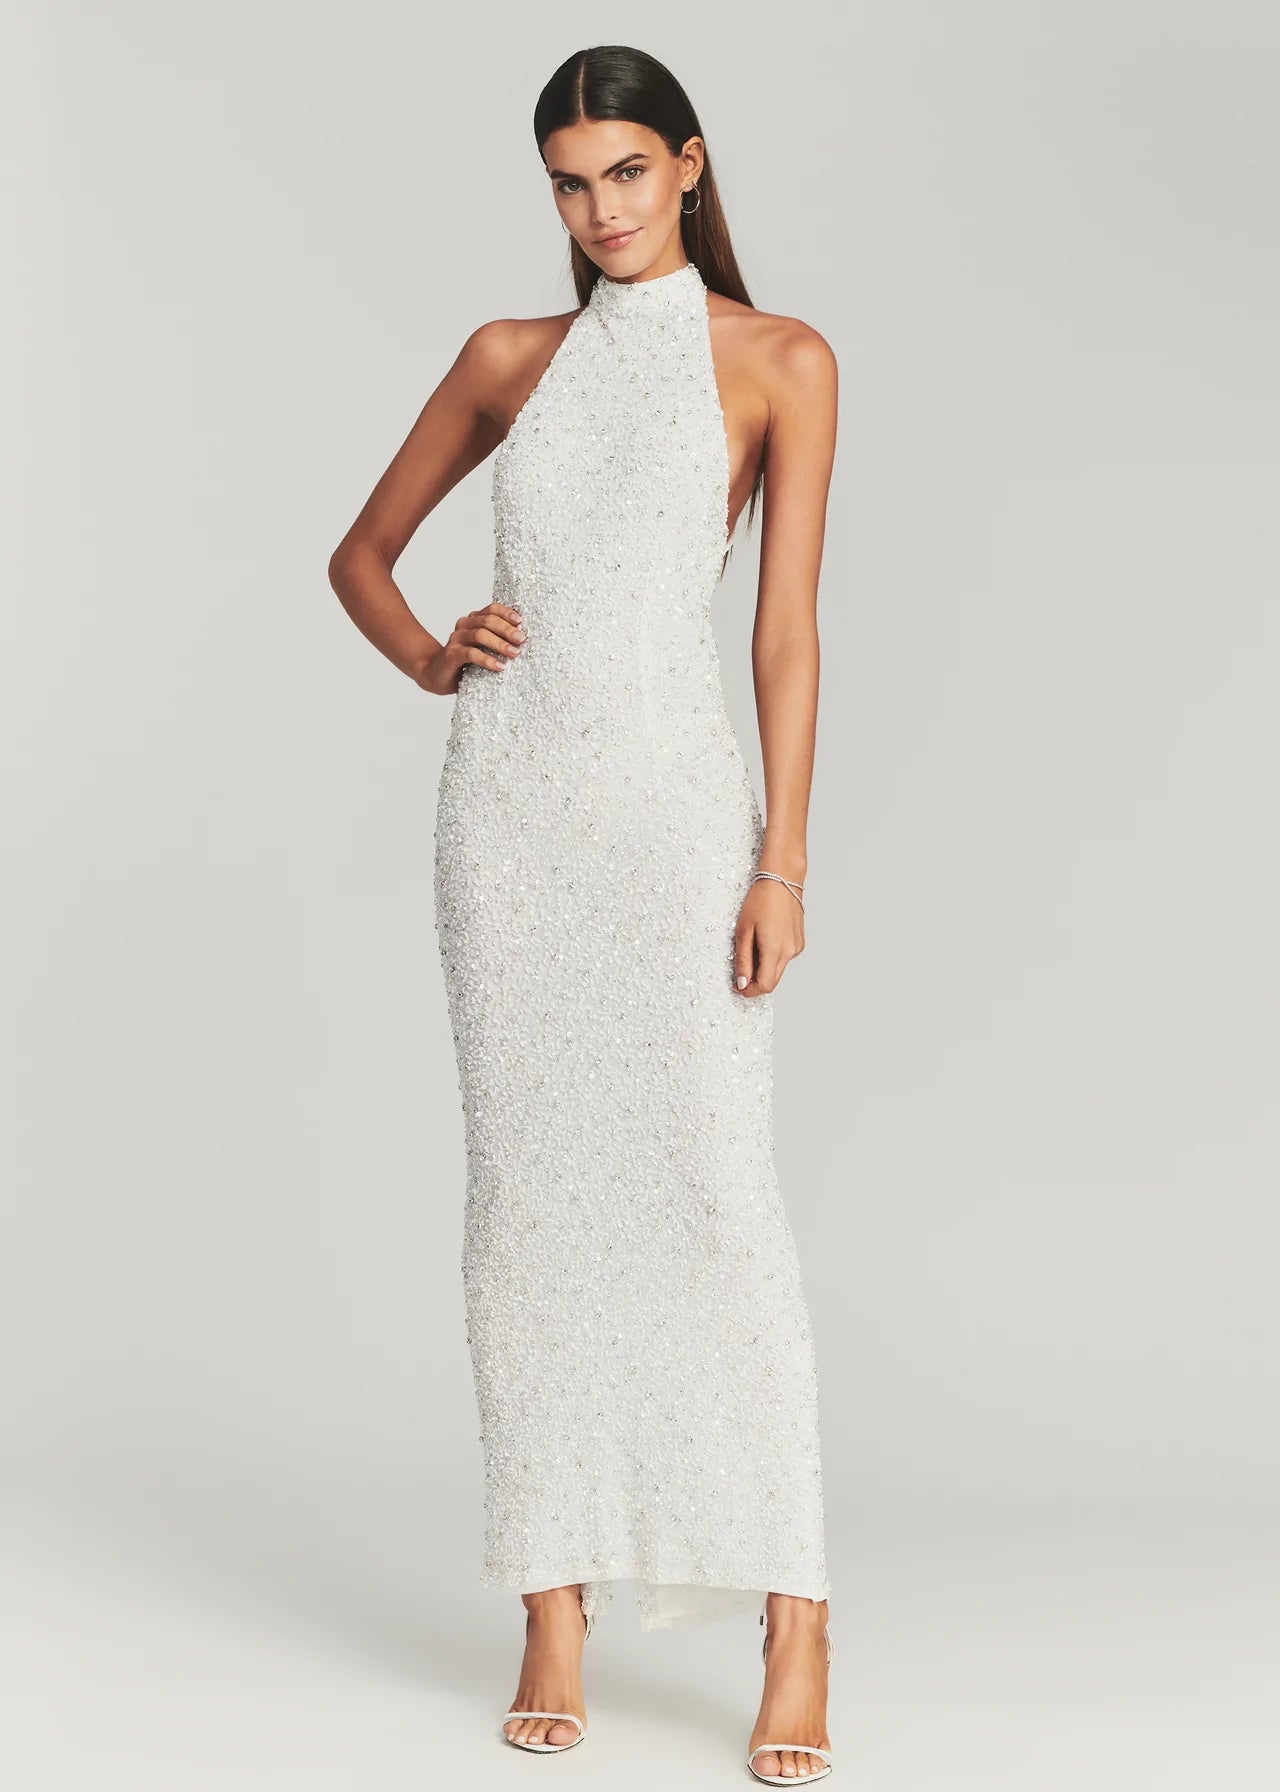 Retrofete Olivia dress. Floor length beaded white halter gown with open low back.